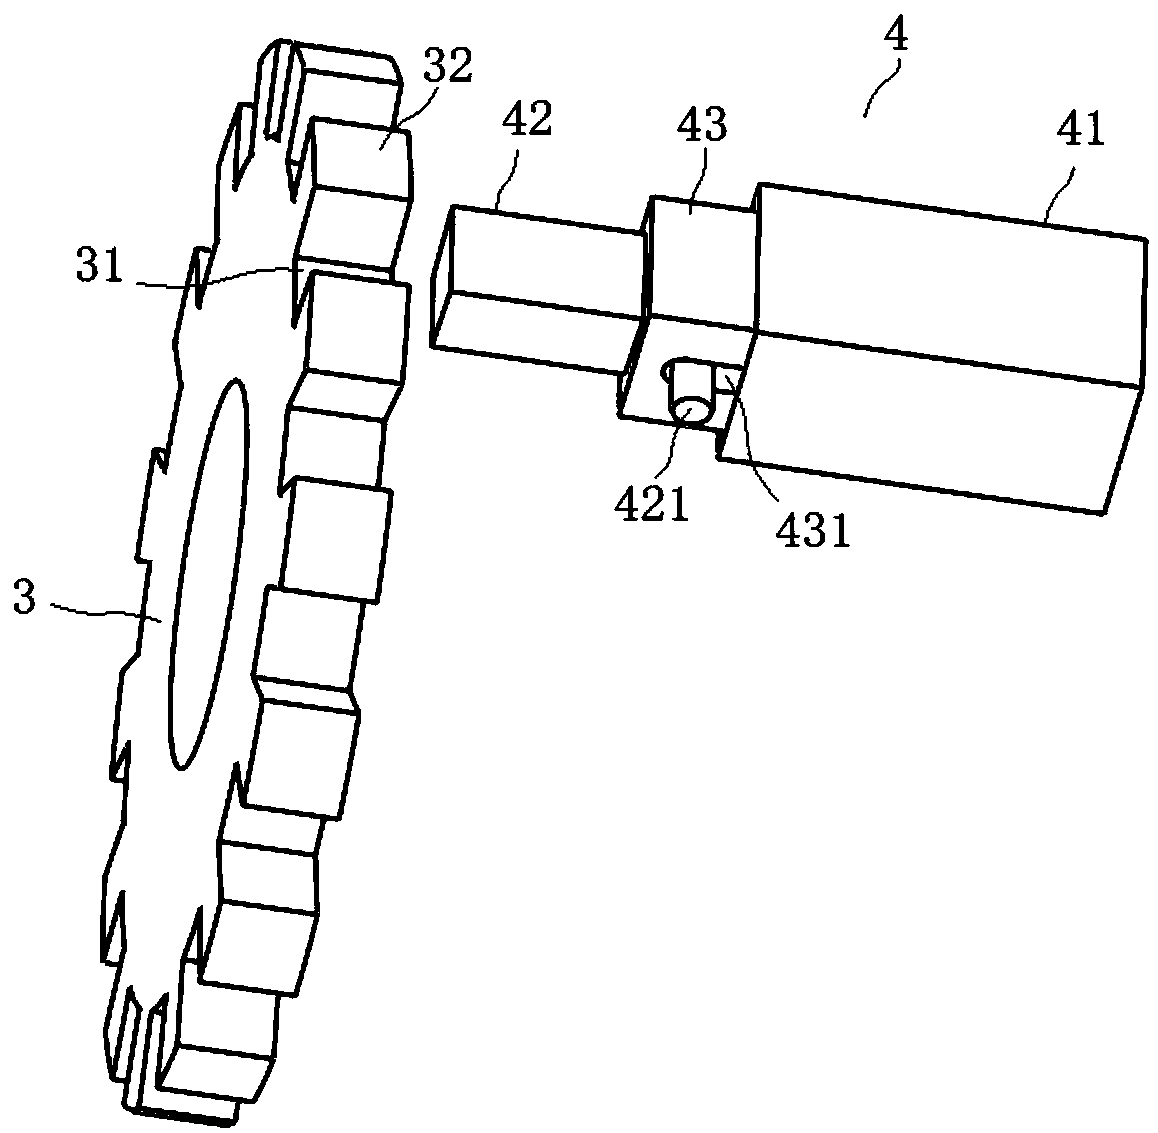 Drive motor for vehicle